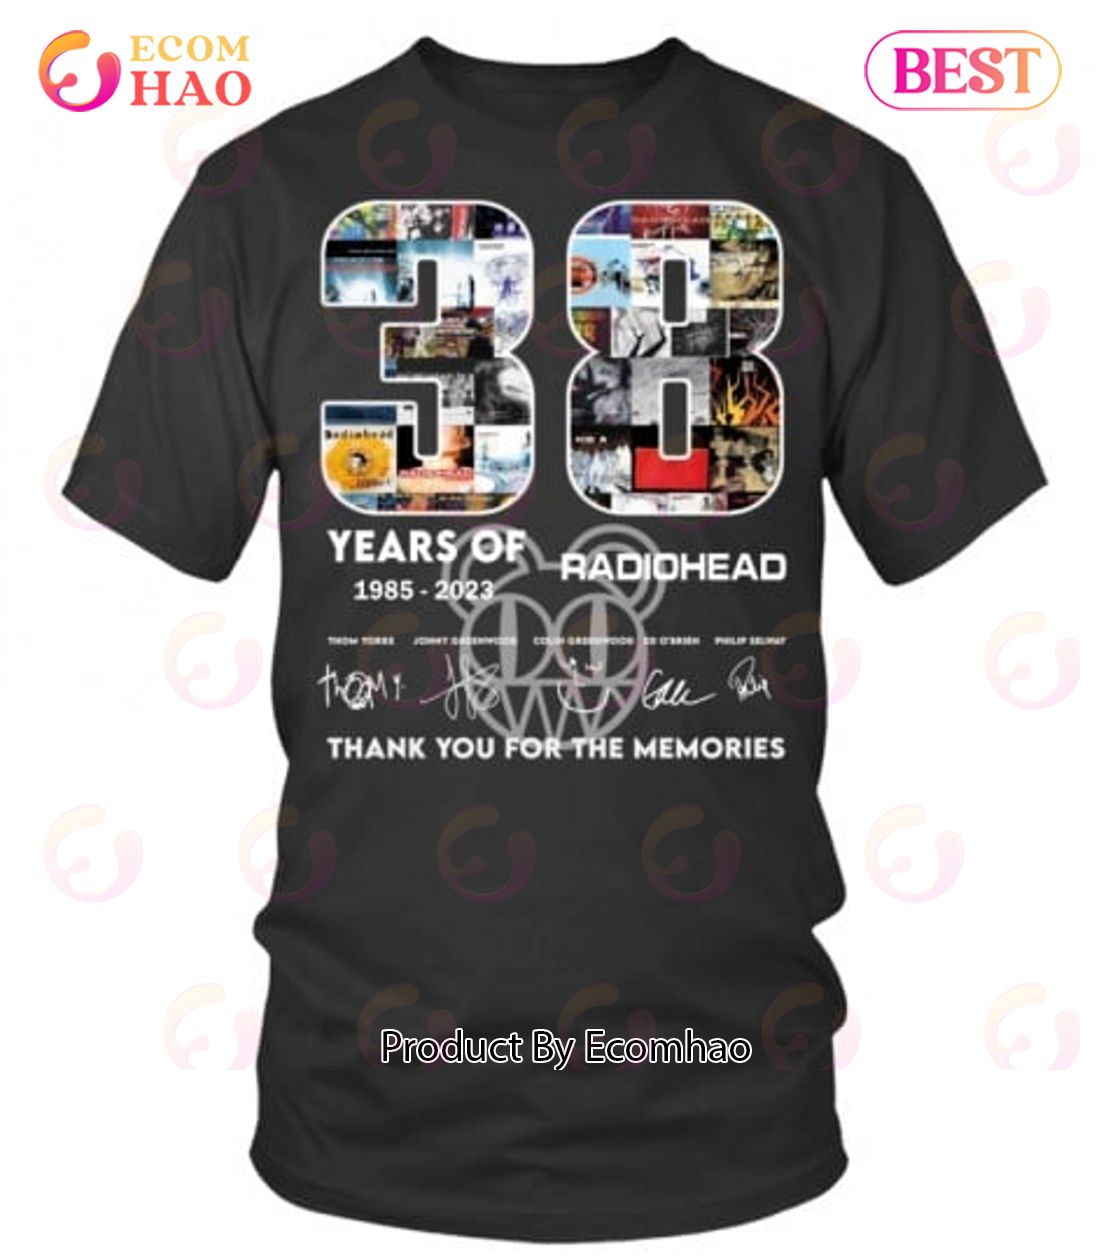 38 Years Of 1985 – 2023 Radiohead Thank You For The Memories T-Shirt